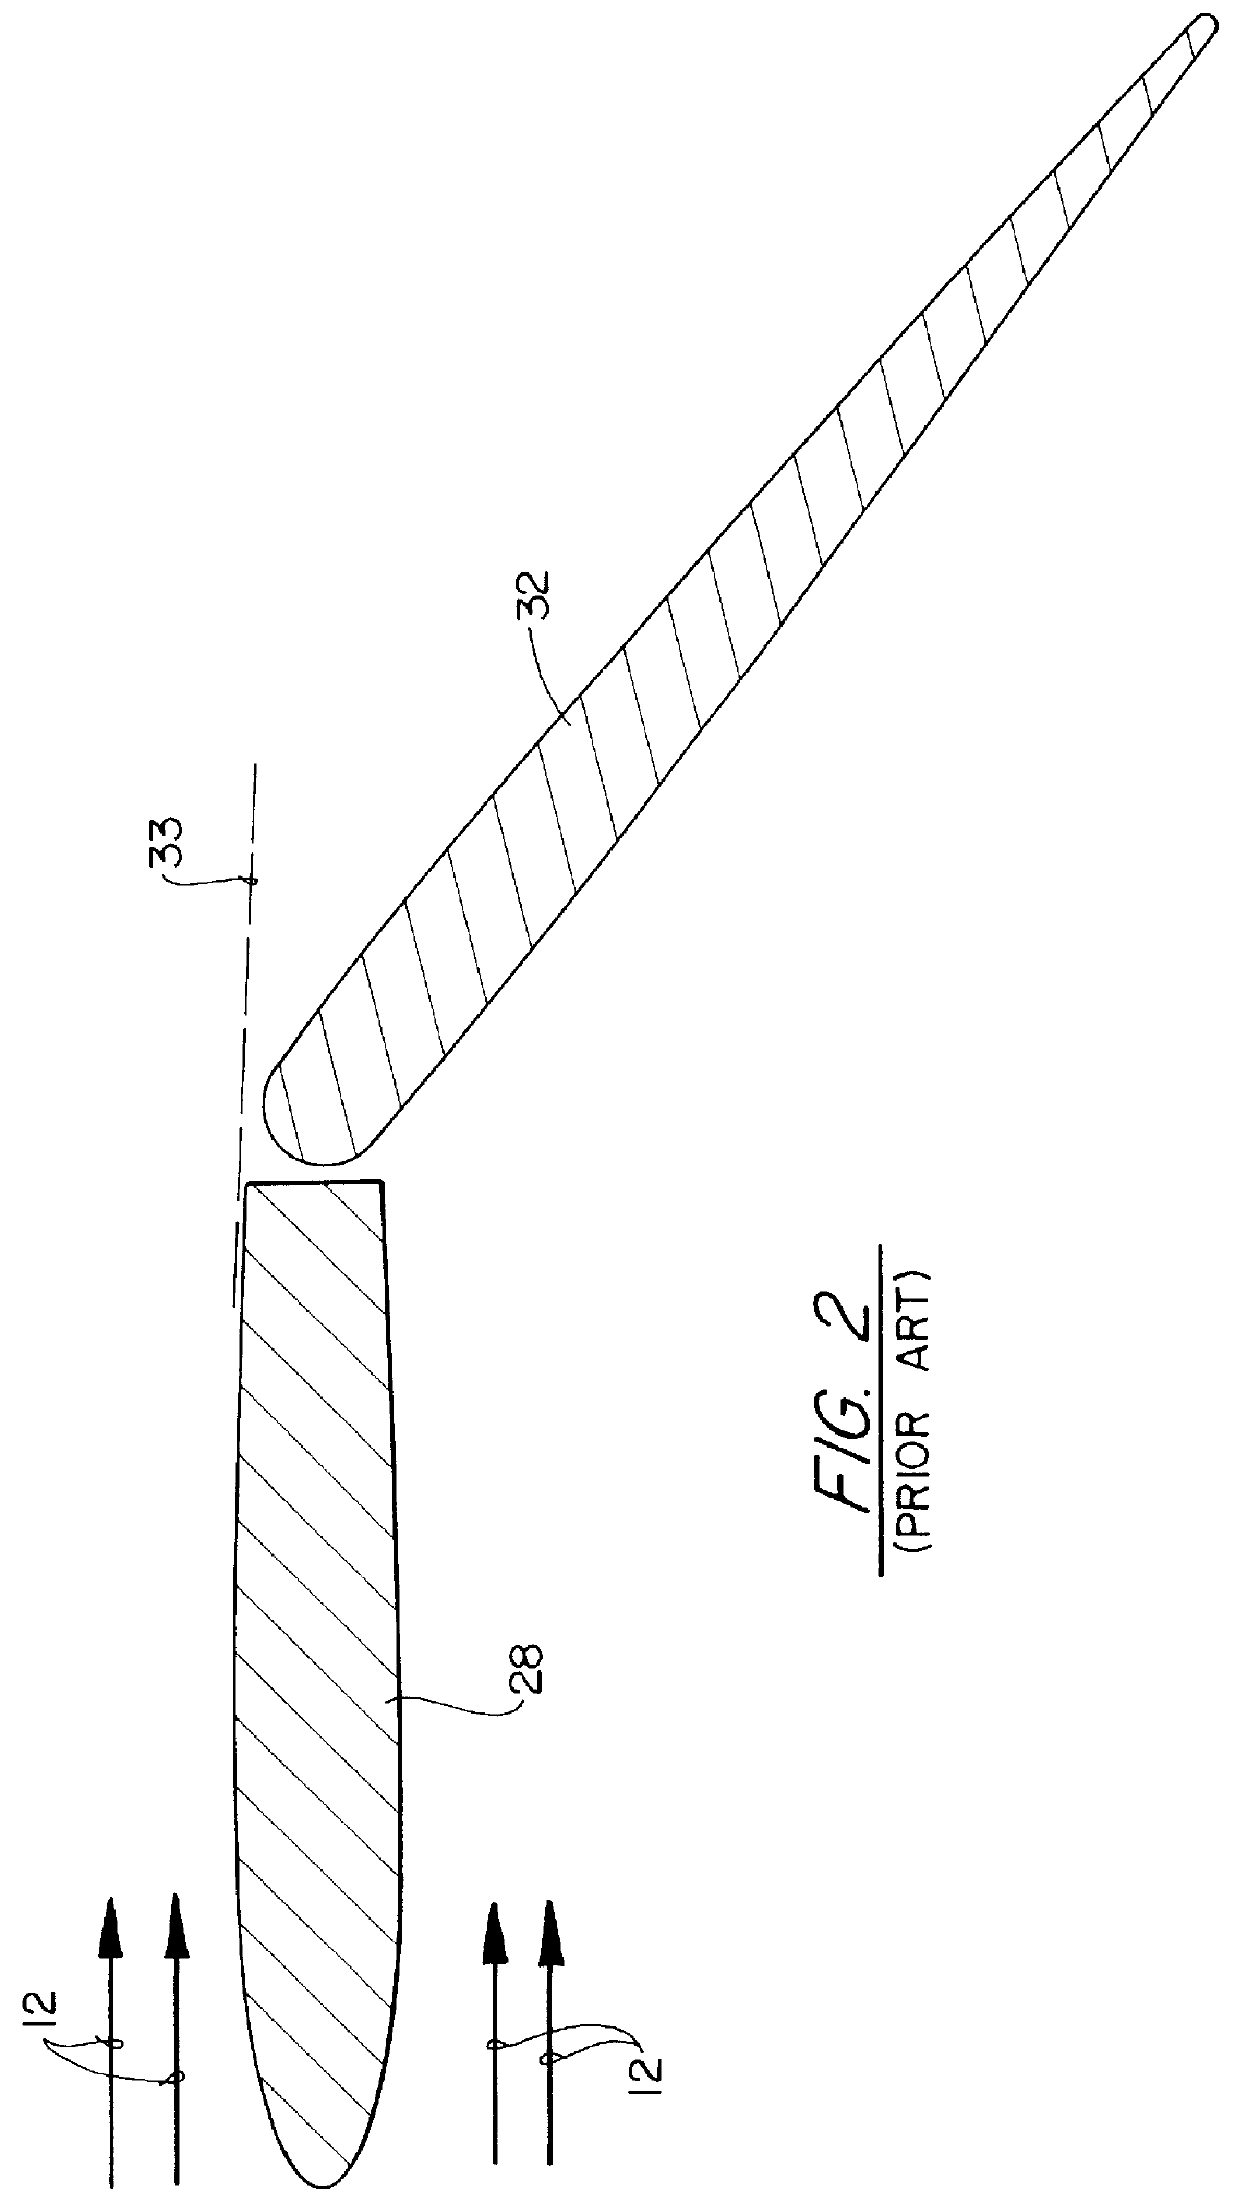 Apparatus for minimizing inlet airflow turbulence in a gas turbine engine